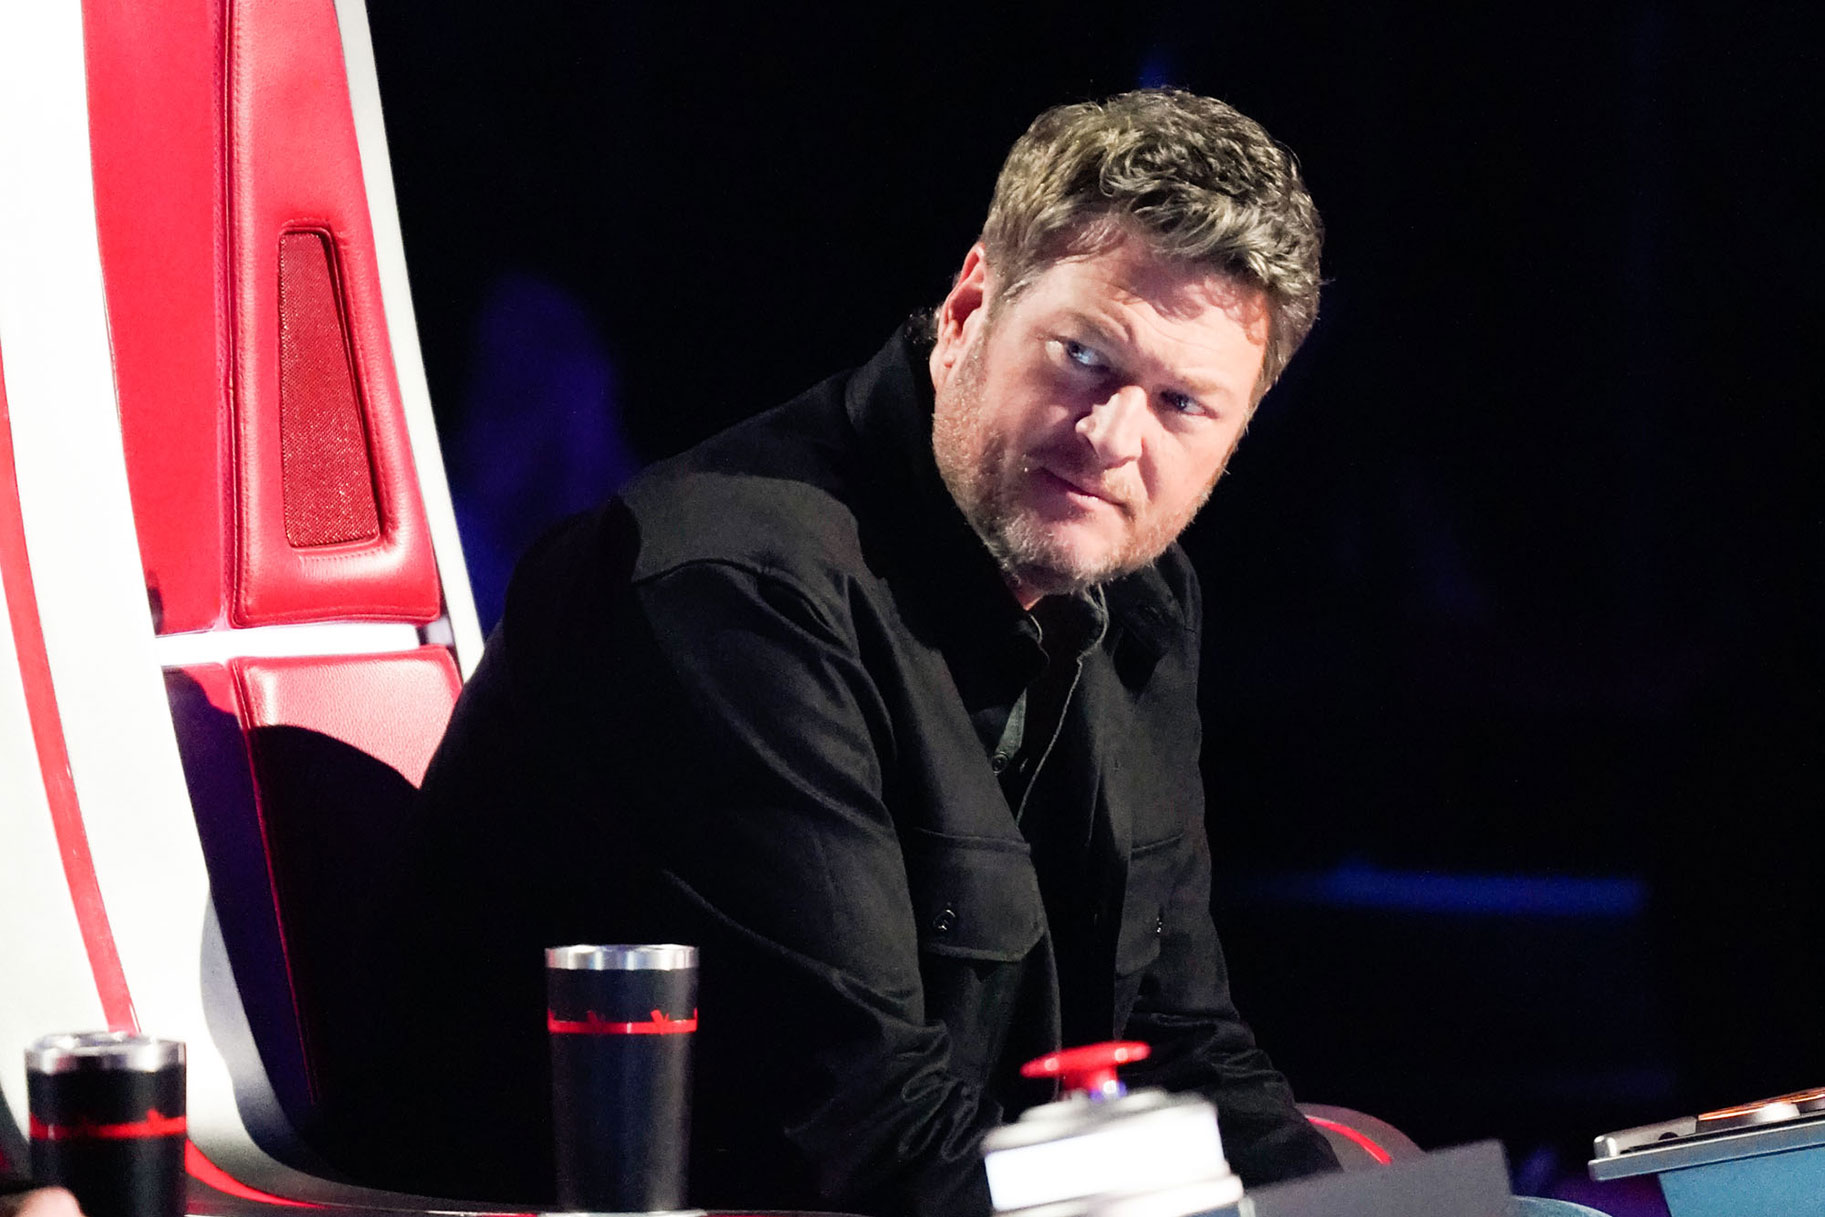 Blake Shelton Just Celebrated a Major Music Milestone That Will Get You Emotional